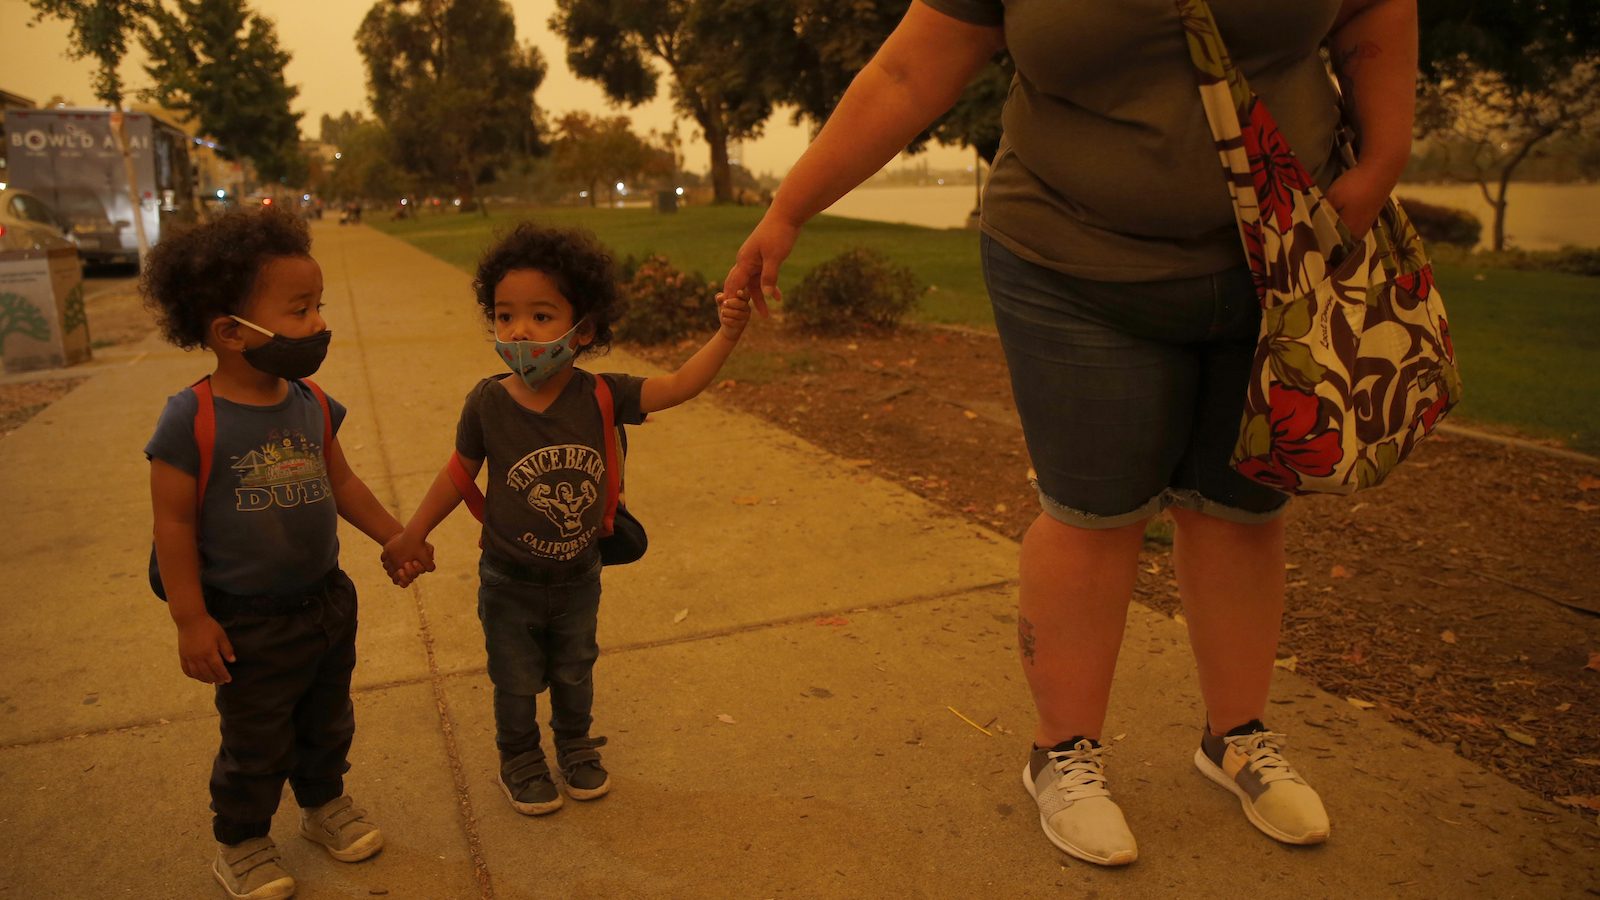 Emory and Henry Peters, 2, walk with their nanny Cynthia Chavez at Lake Merritt in Oakland, Calif., on Wednesday, Sept. 9, 2020. The unusual orange and red-hued skies were a result of smoke from the Northern California wildfires.